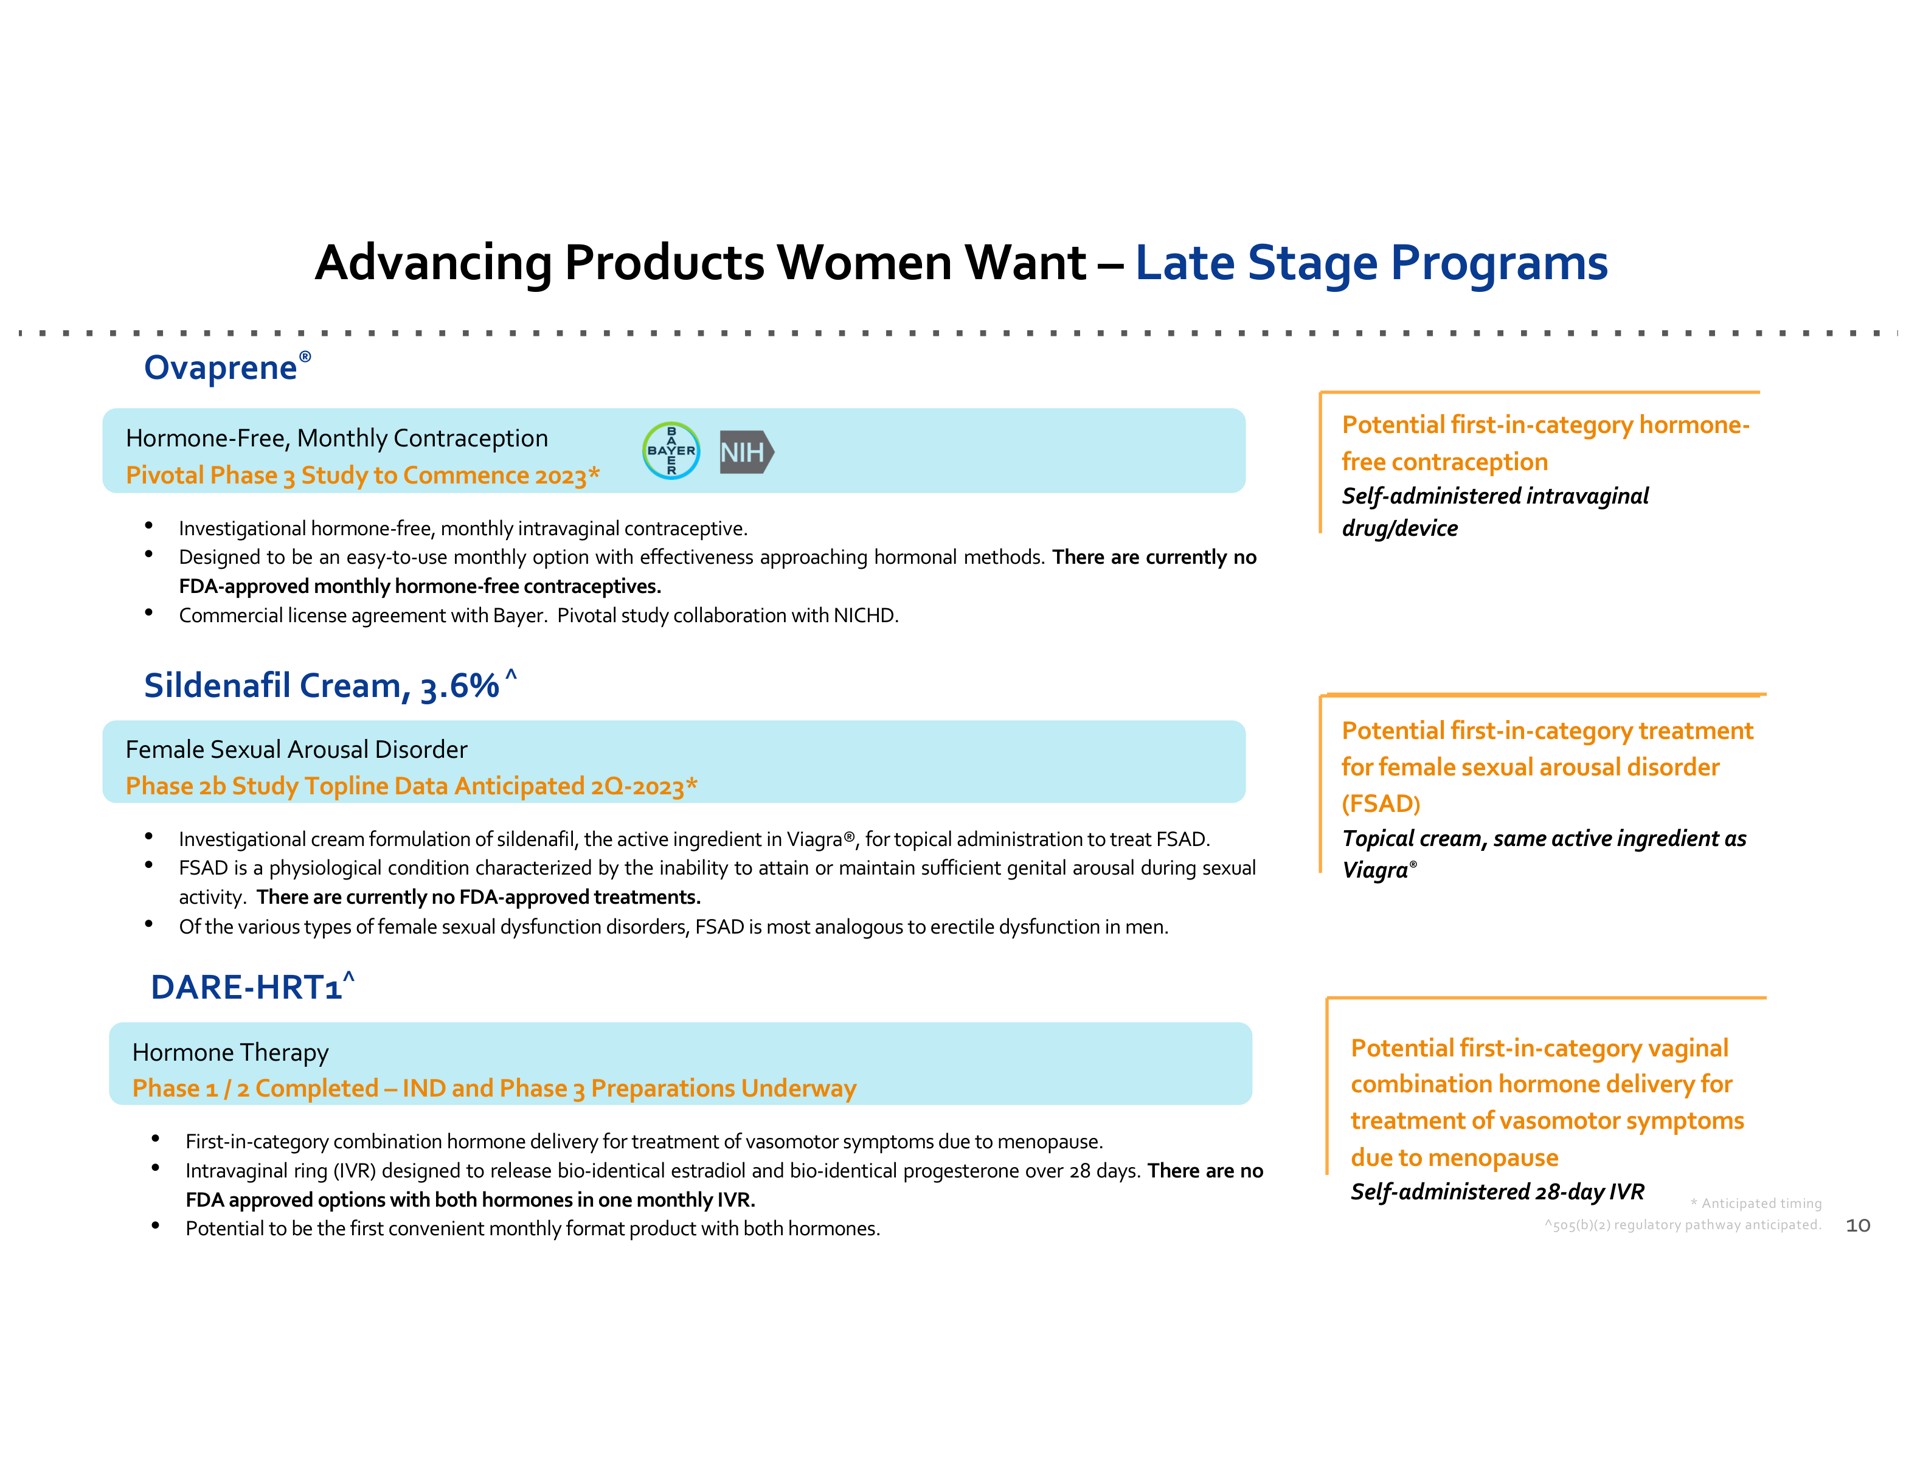 advancing products women want late stage programs cream dare | Dare Bioscience